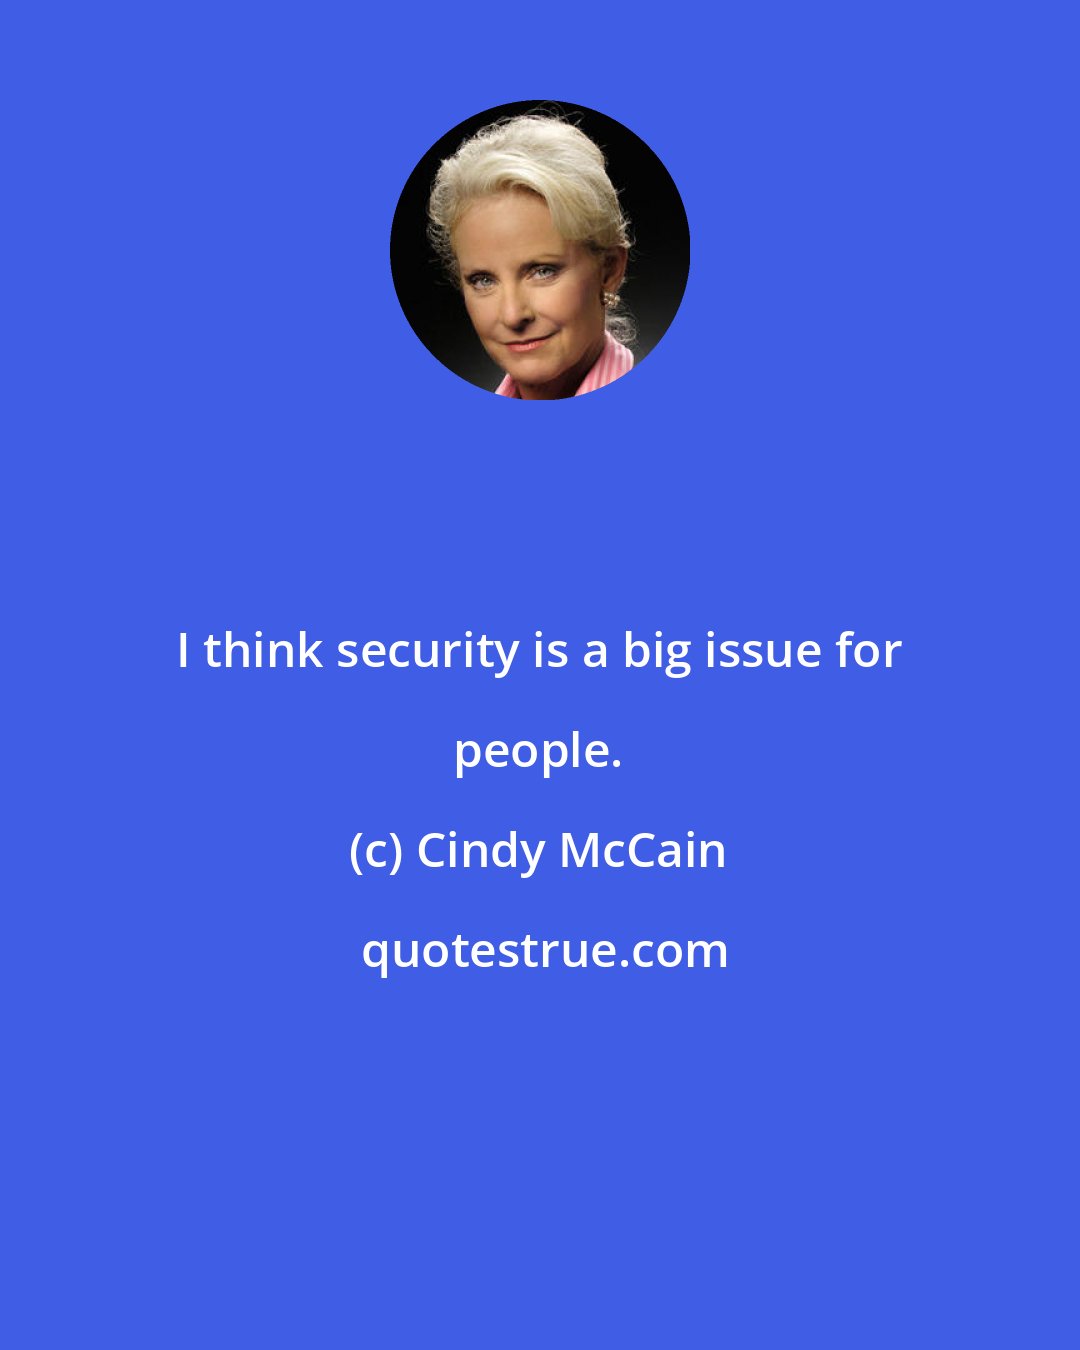 Cindy McCain: I think security is a big issue for people.